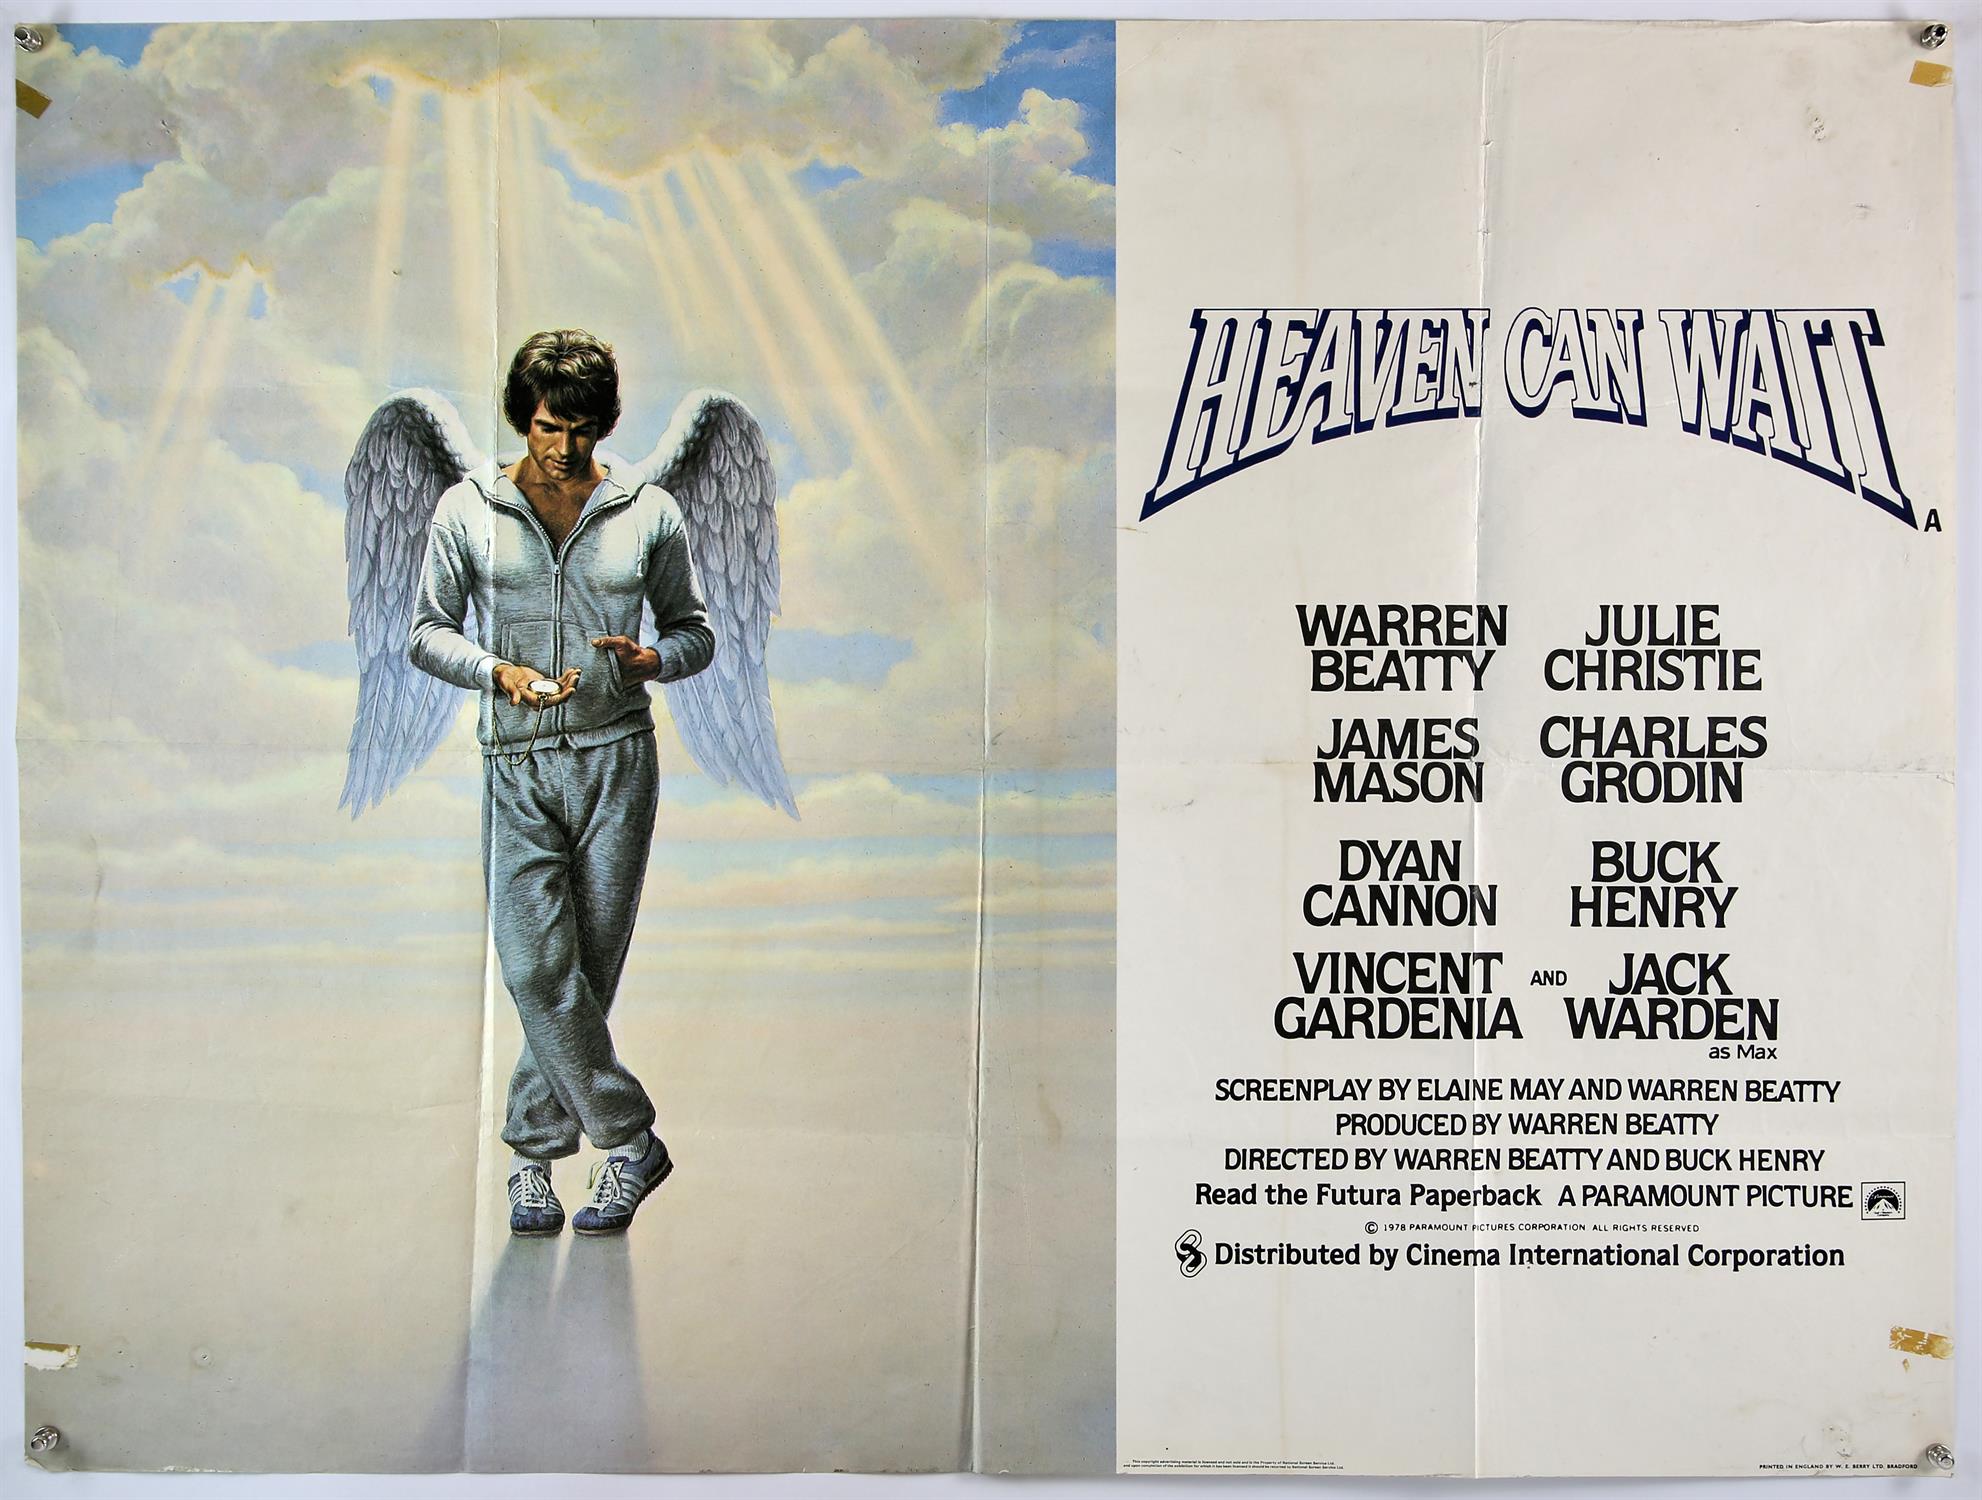 40+ British Quad film posters, including The Great Waldo Pepper, Heaven Can Wait, The Trap, - Image 2 of 10